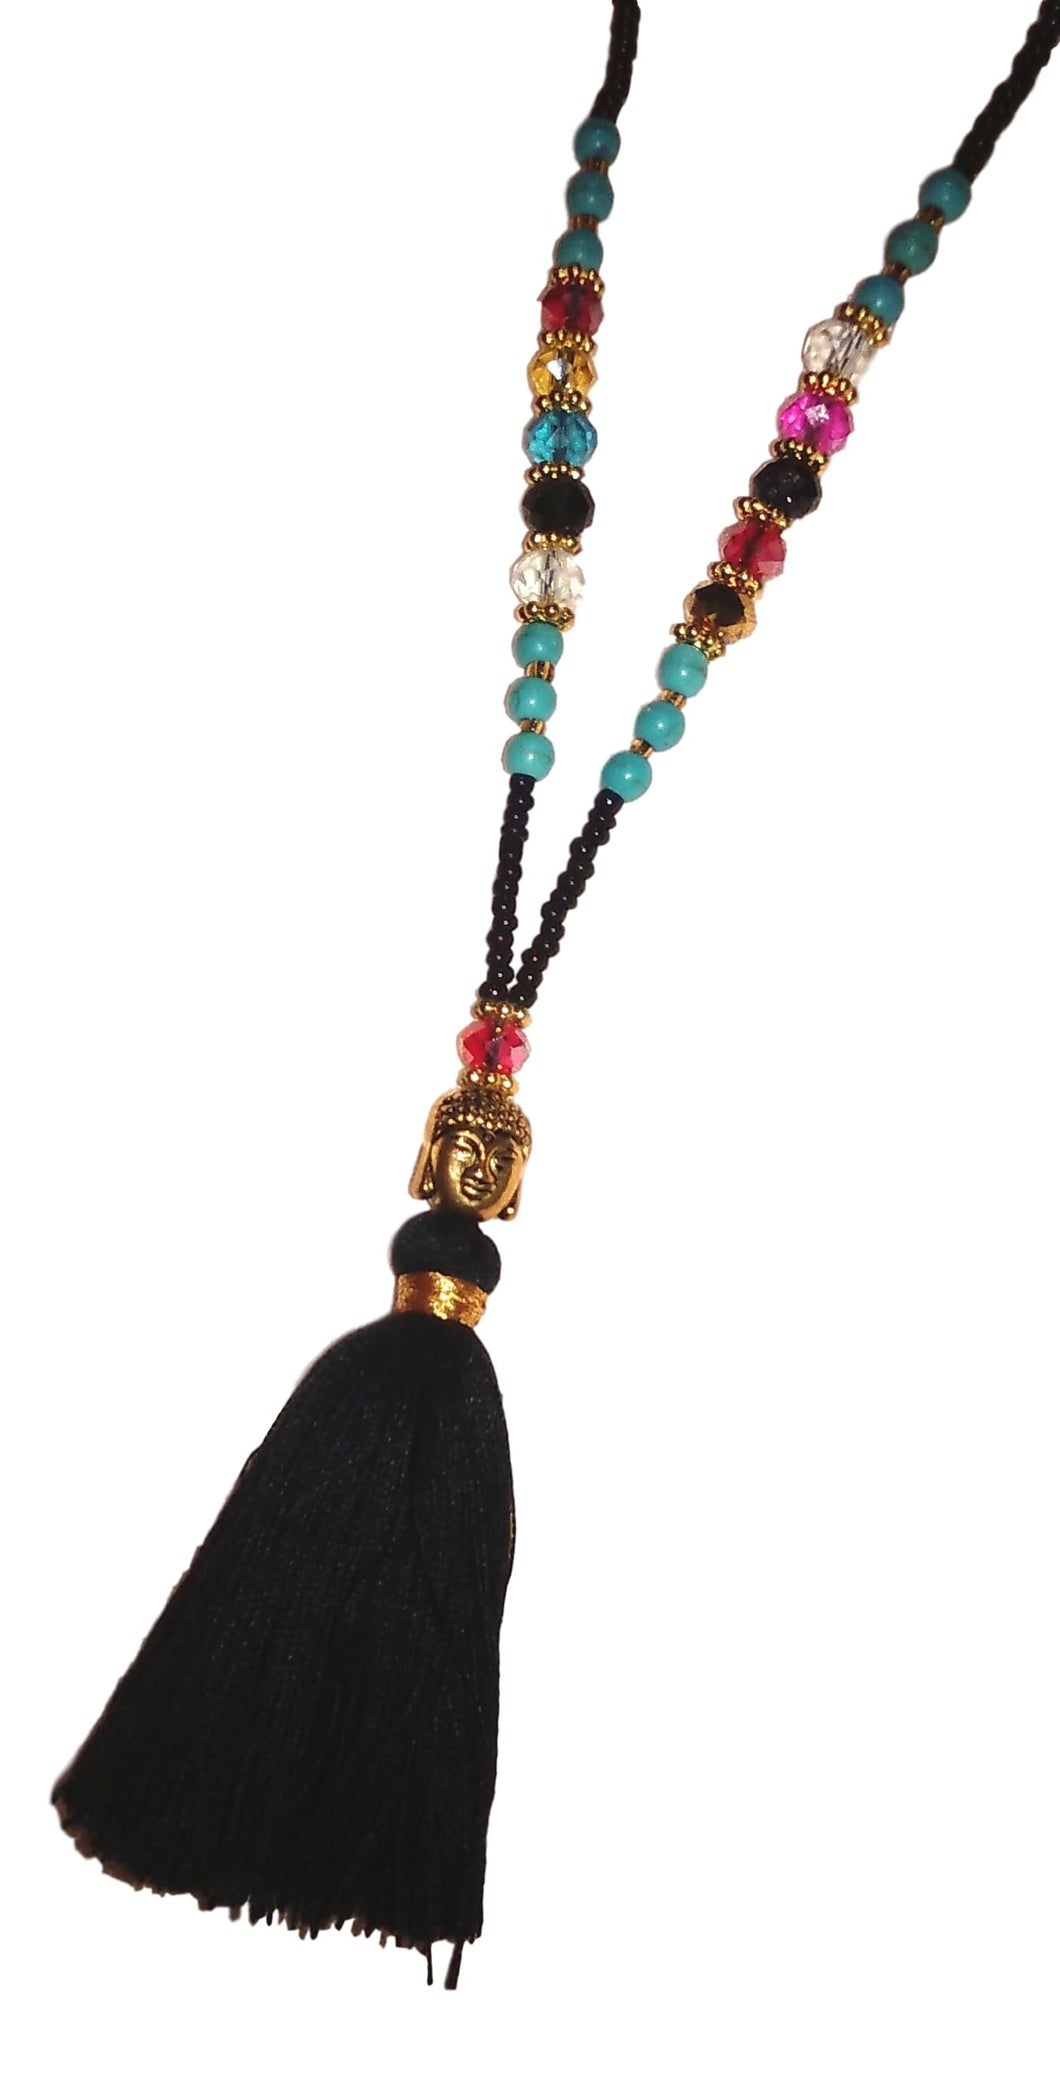 Jewelry - Colorful Mala Necklace with Buddha and small beads - Black - SEPTEMBER PROMO